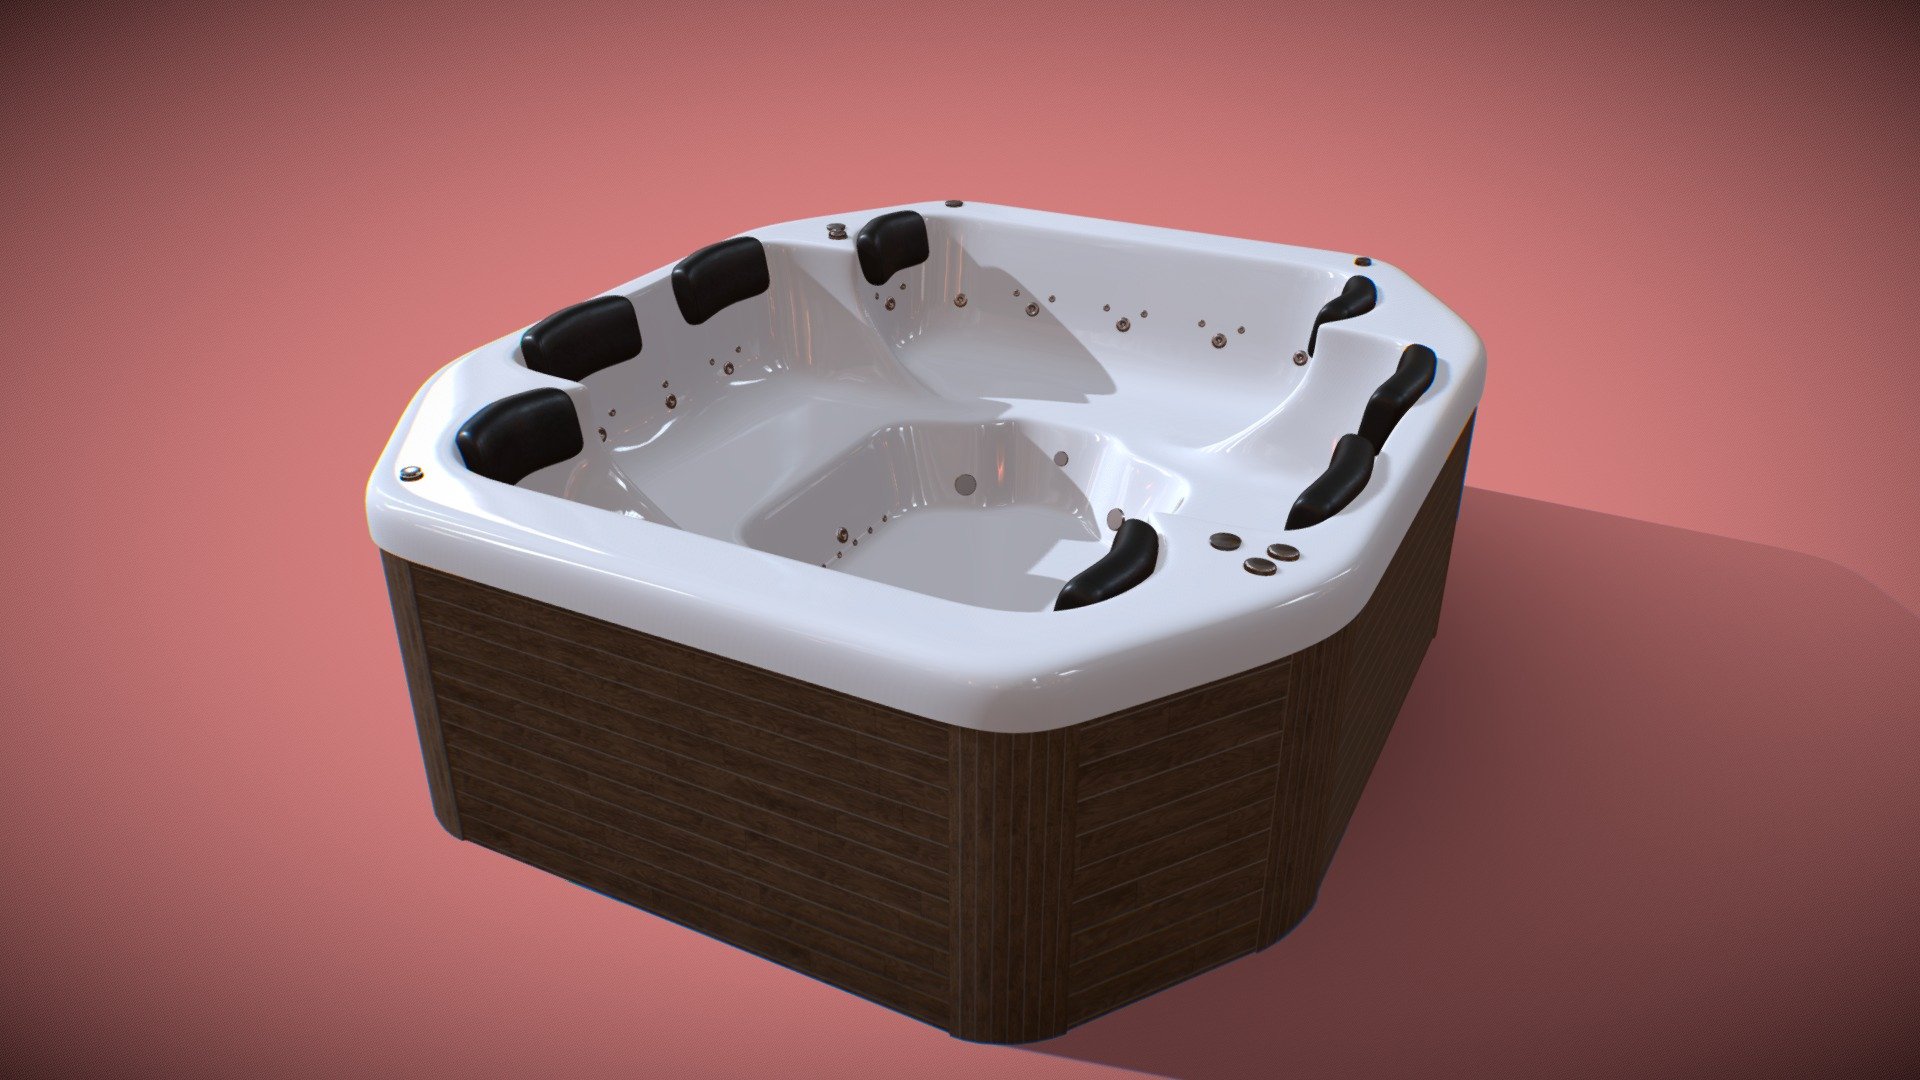 Whirlpool Spa.
4k textures.
Fit for 6 up to 8 people.

Dimensions:
(length x width x height)
2,5m x 2,2m x 1m   //  8.2ft x 7.2ft x 3.2ft - Whirlpool Spa - 3D model by Guilherme Pacanaro (@pacanarogp) 3d model